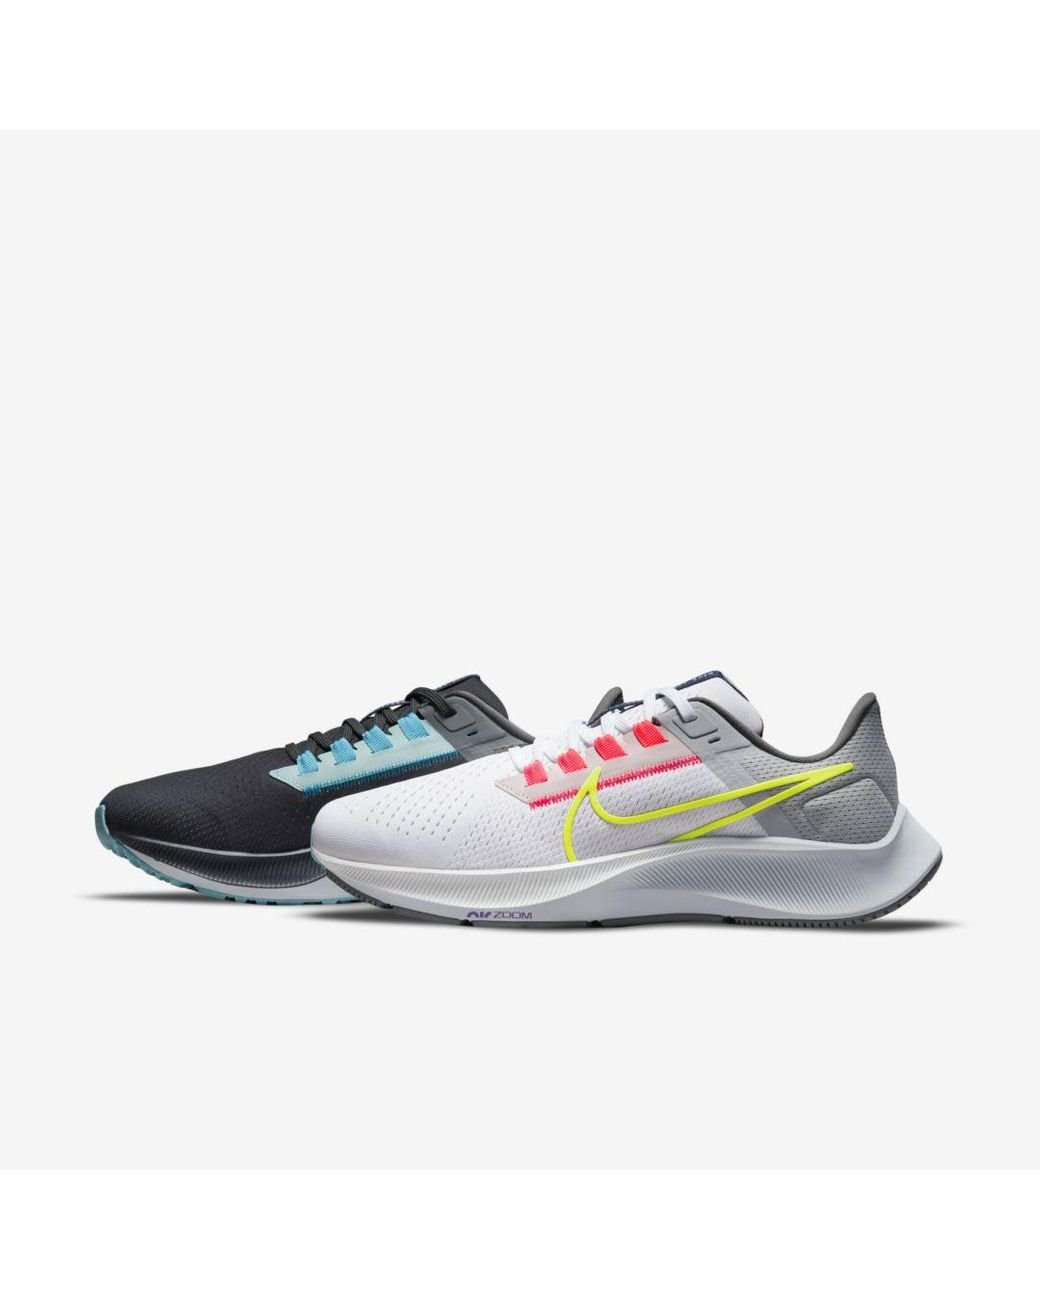 Nike Air Zoom Pegasus 38 Limited Edition Road Running Shoes in Gray | Lyst